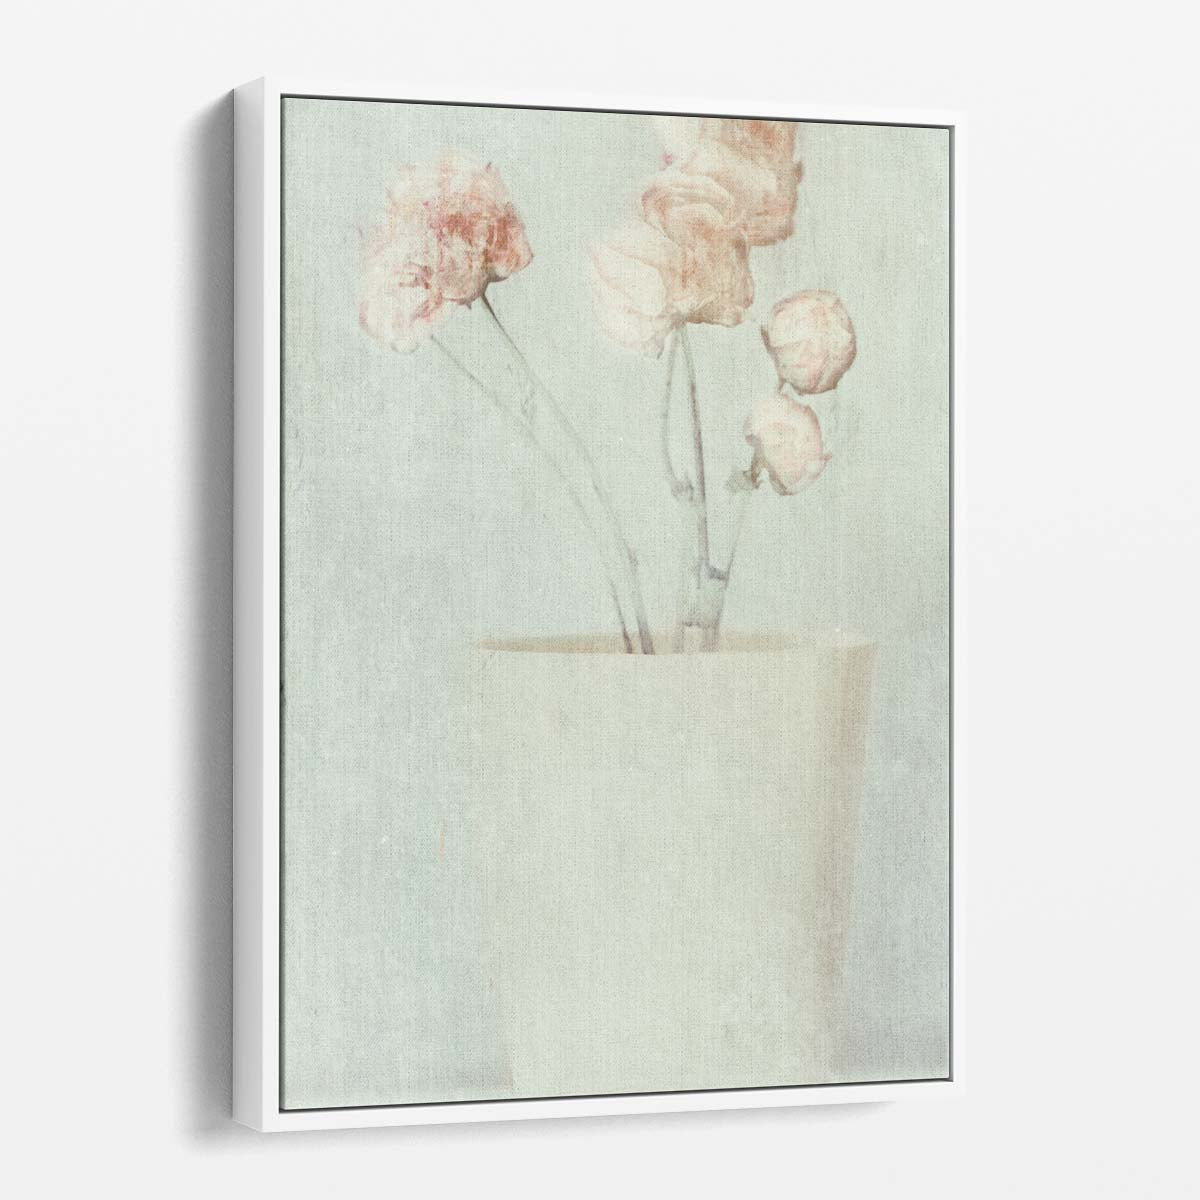 Vintage Pink Rose Floral Photography, Textured Oil Painting Art by Luxuriance Designs, made in USA